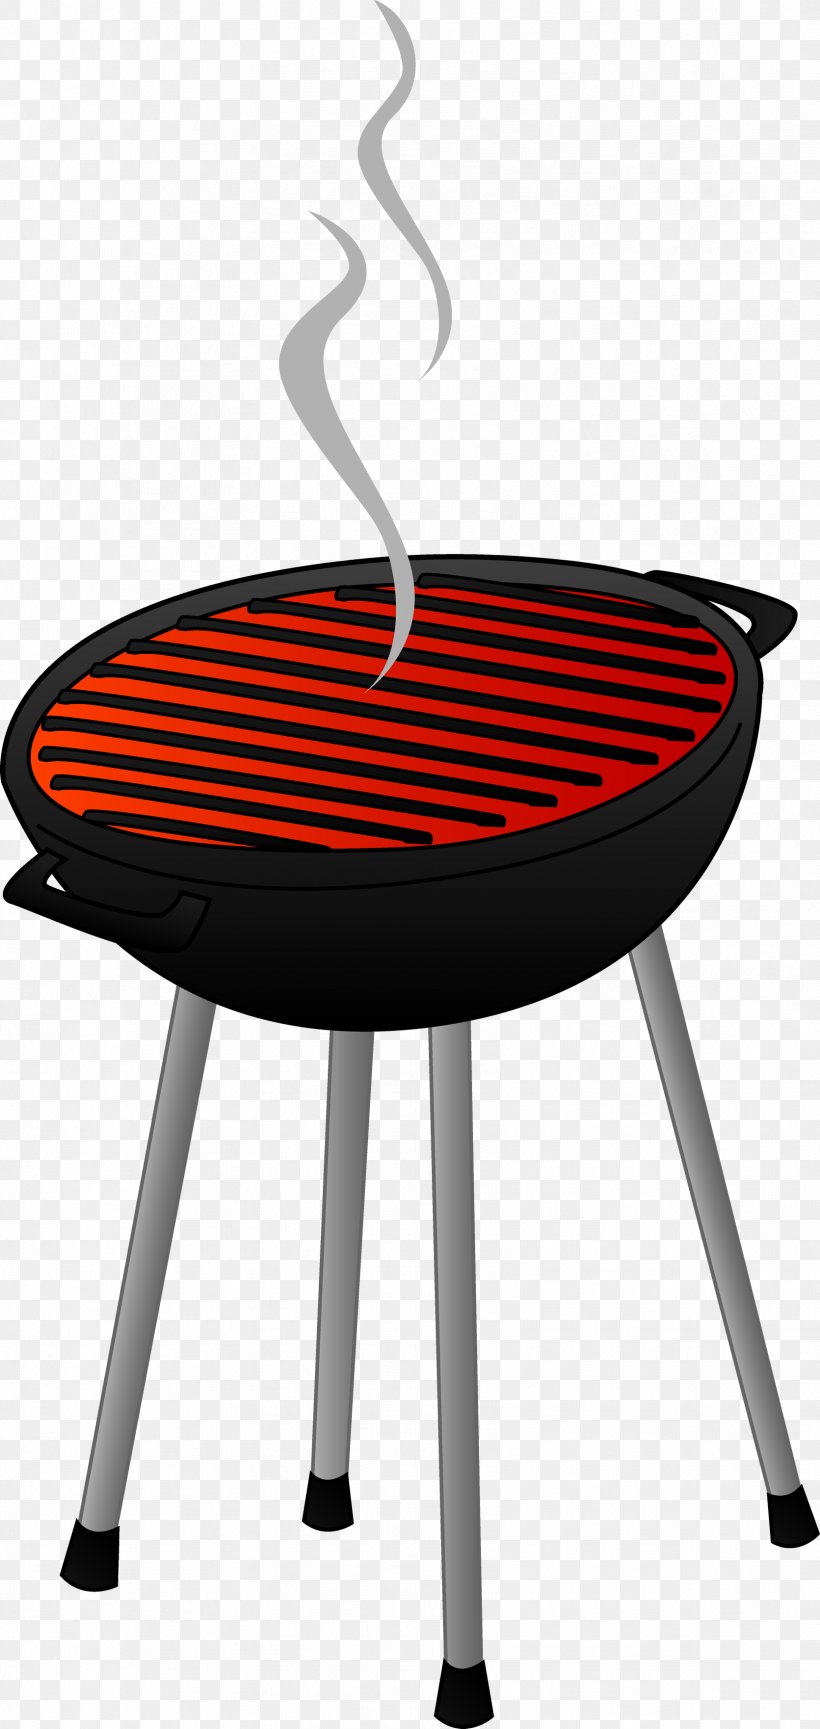 Barbecue Grill Grilling Barbecue Sauce Clip Art, PNG, 1671x3524px, Barbecue Grill, Barbecue Chicken, Barbecue Sauce, Chair, Furniture Download Free